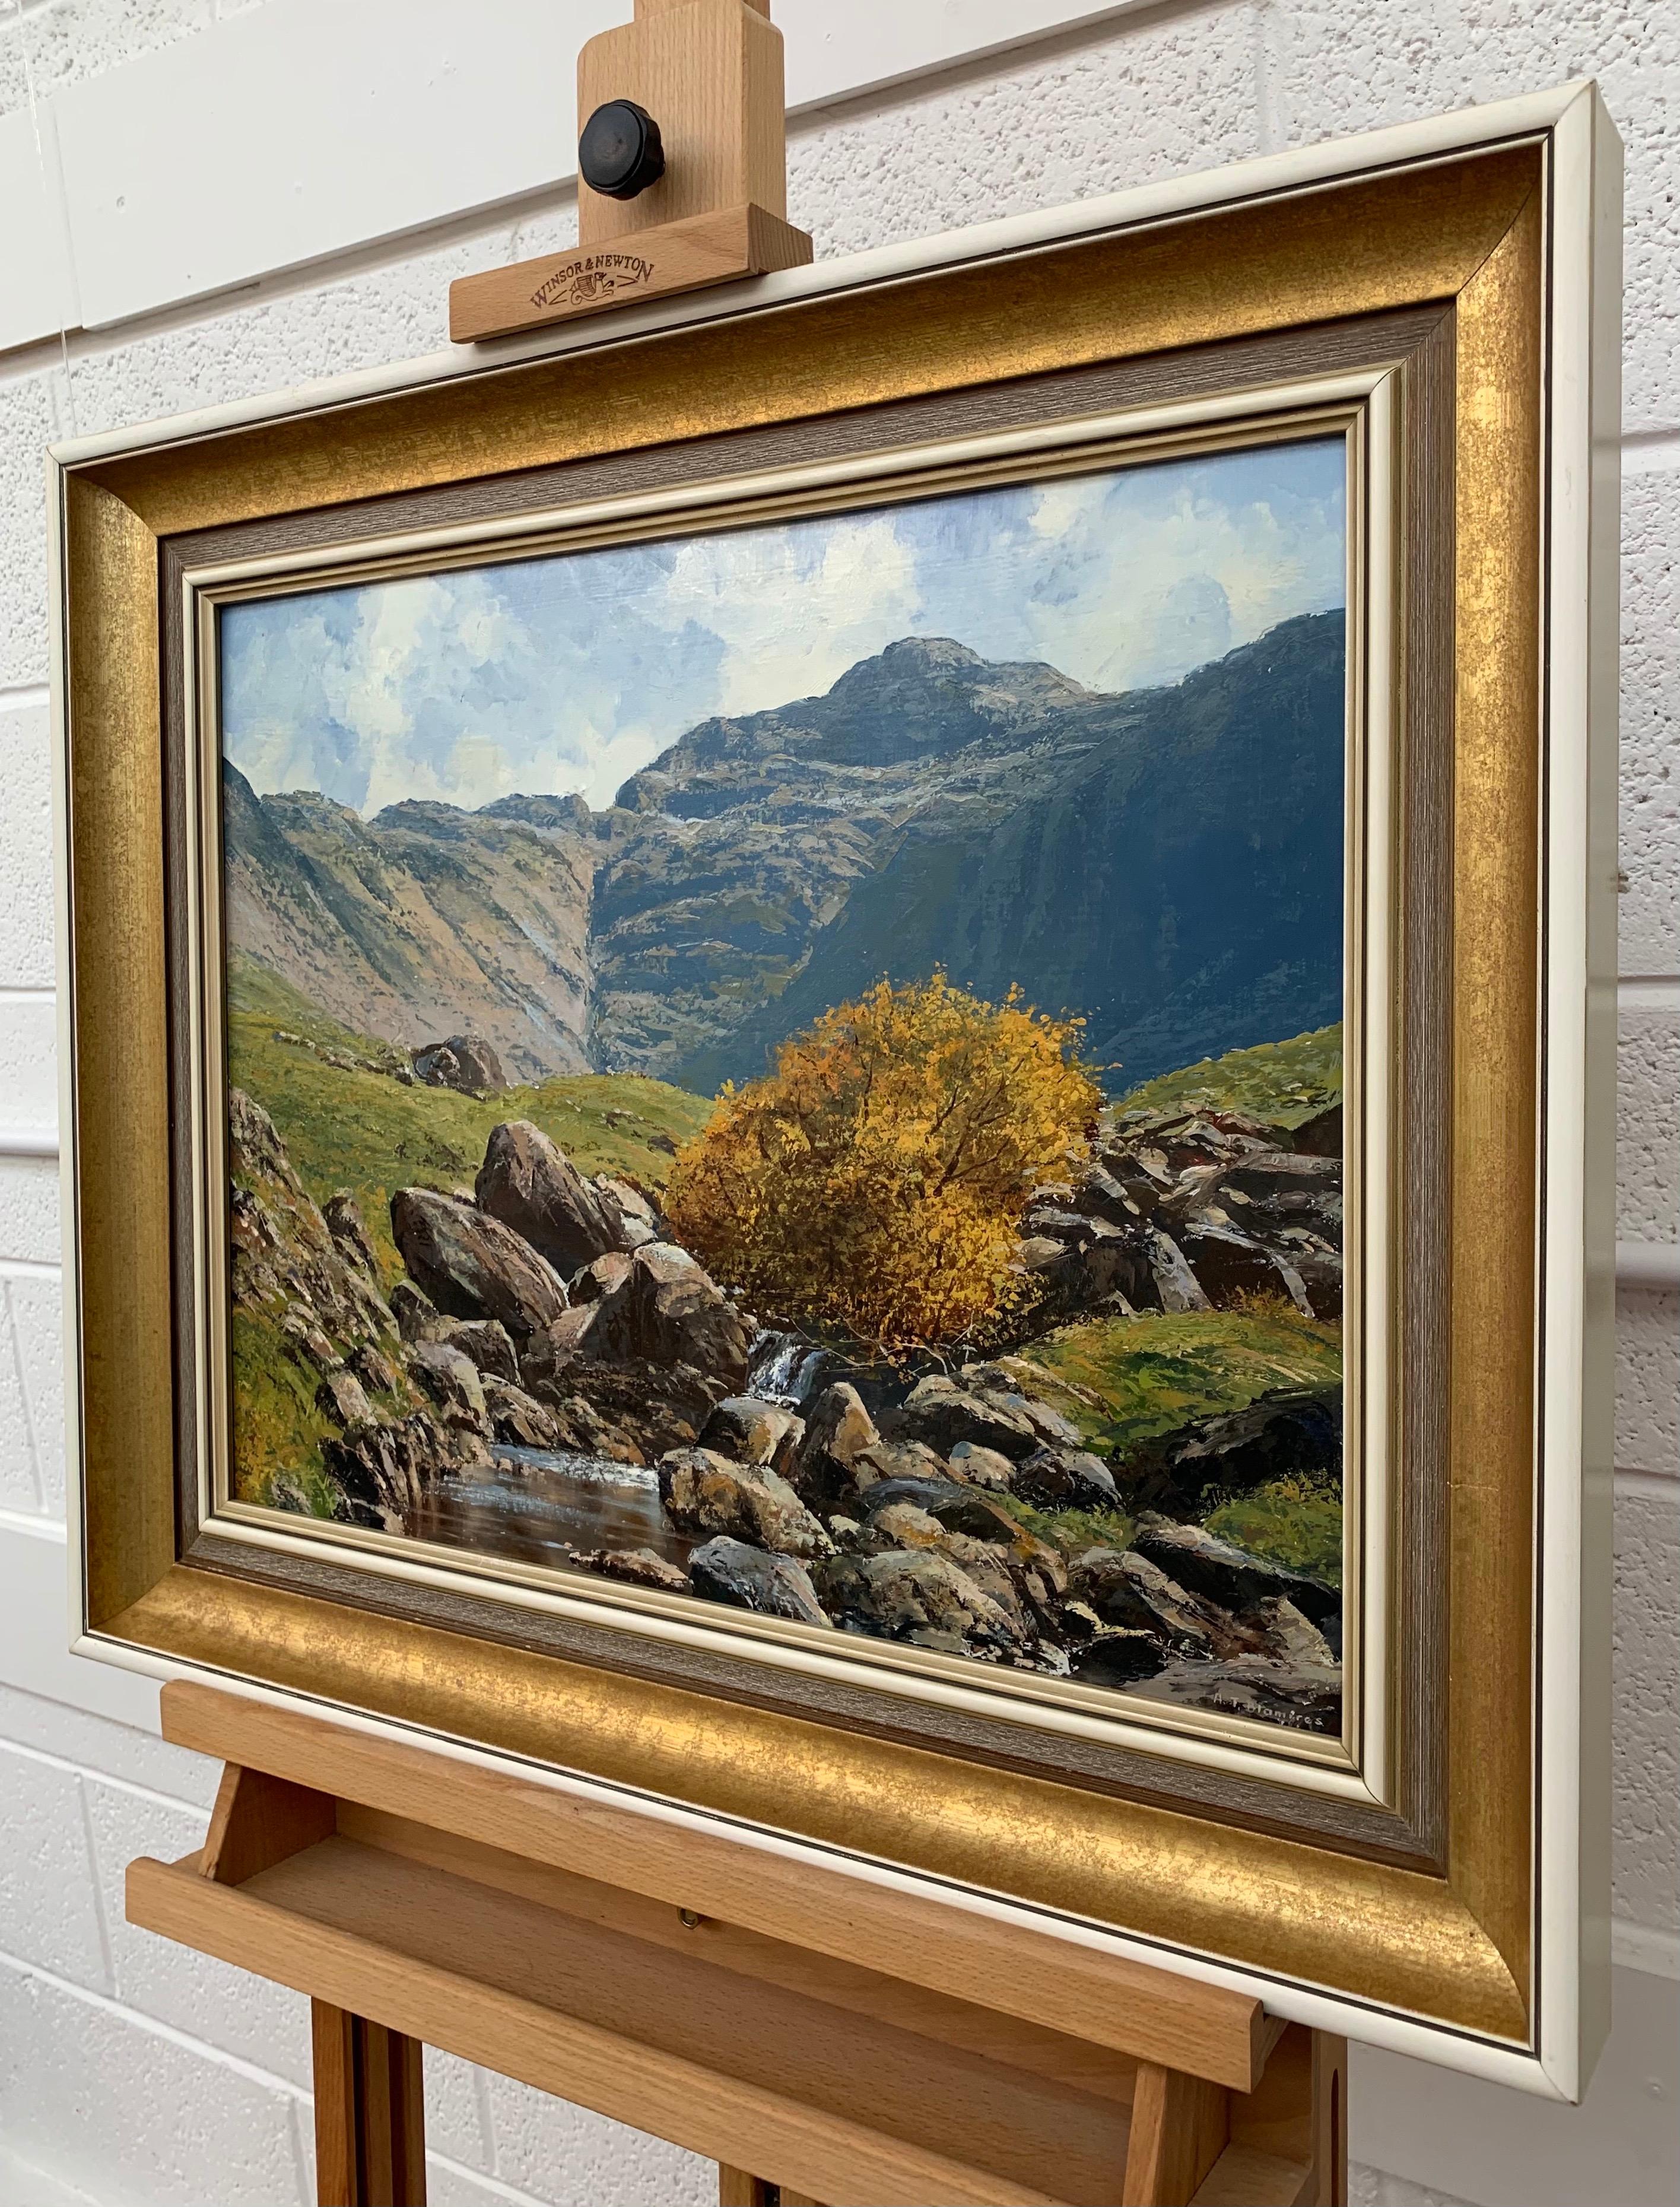 Oil Painting of Glaramara and Combe Ghyll in the English Lake District by Modern British Landscape Artist Arthur Terry Blamires (b. 1930)

Art measures 20 x 16 inches
Frame measure 25 x 21 inches

Oil on board, signed, inscribed to a label verso and